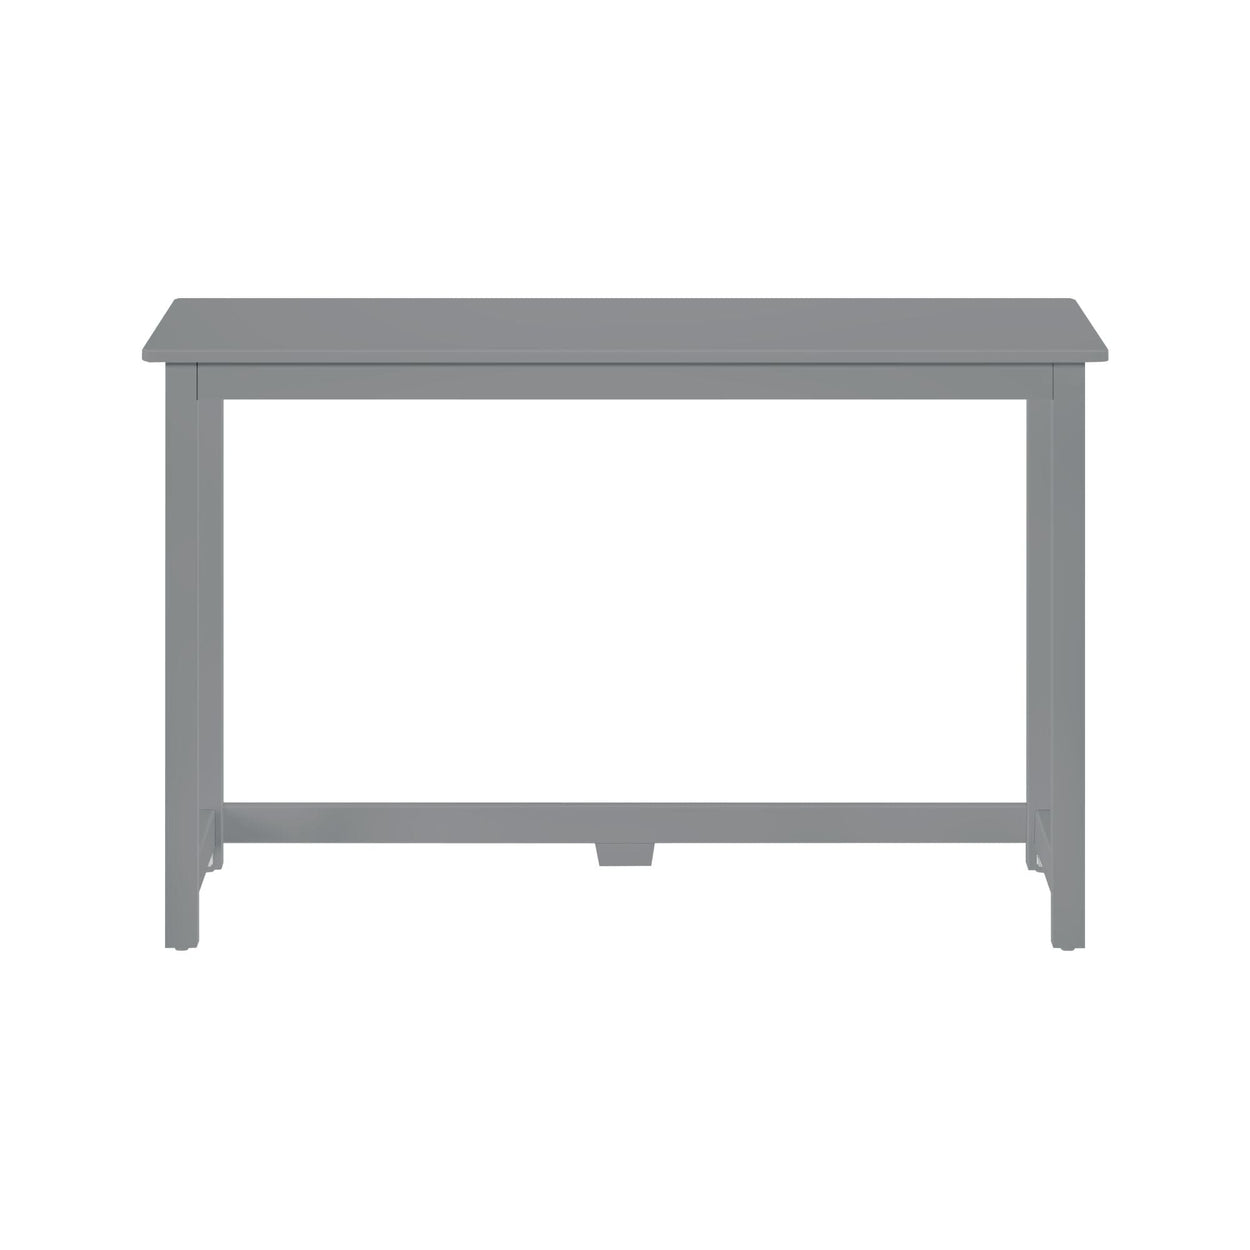 181200-121 : Furniture Simple Desk - 47 inches, Grey